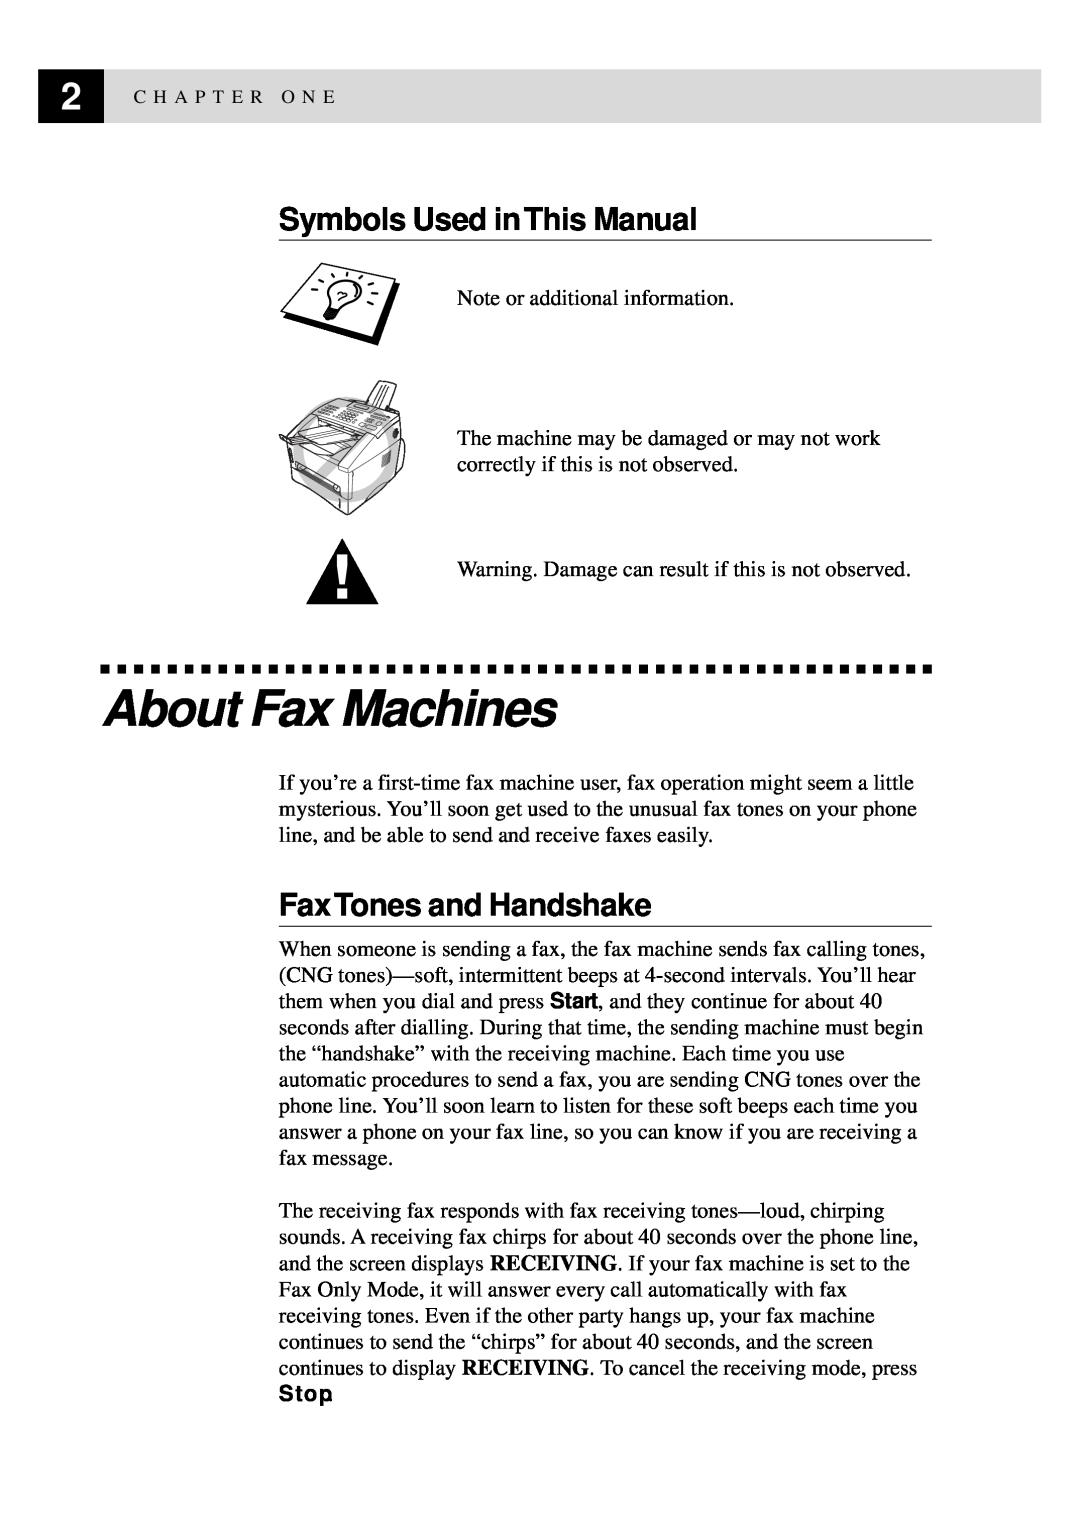 Brother FAX-8350P, MFC-9650 owner manual About Fax Machines, Symbols Used in This Manual, Fax Tones and Handshake 